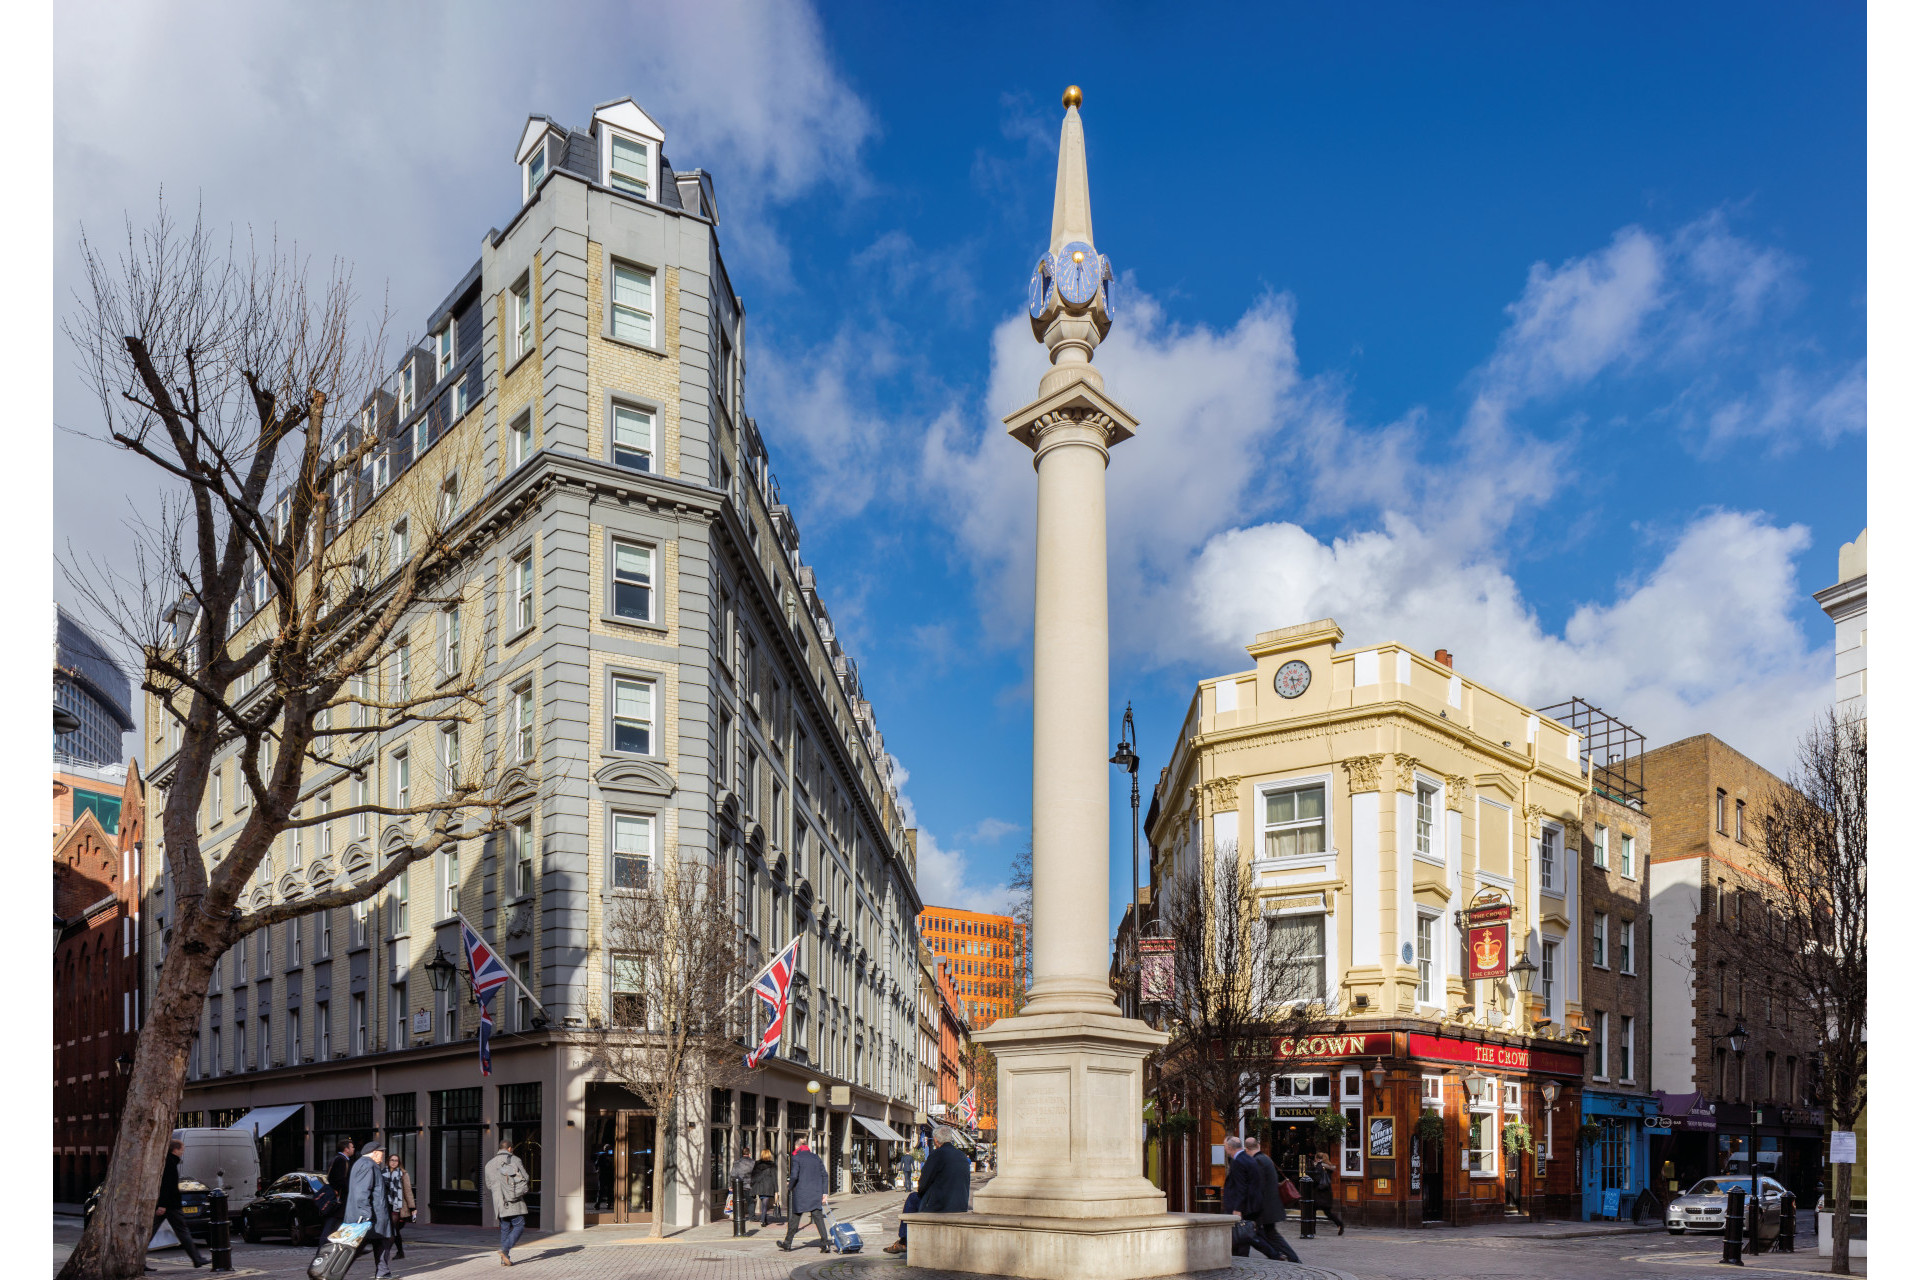 The Seven Dials Monument